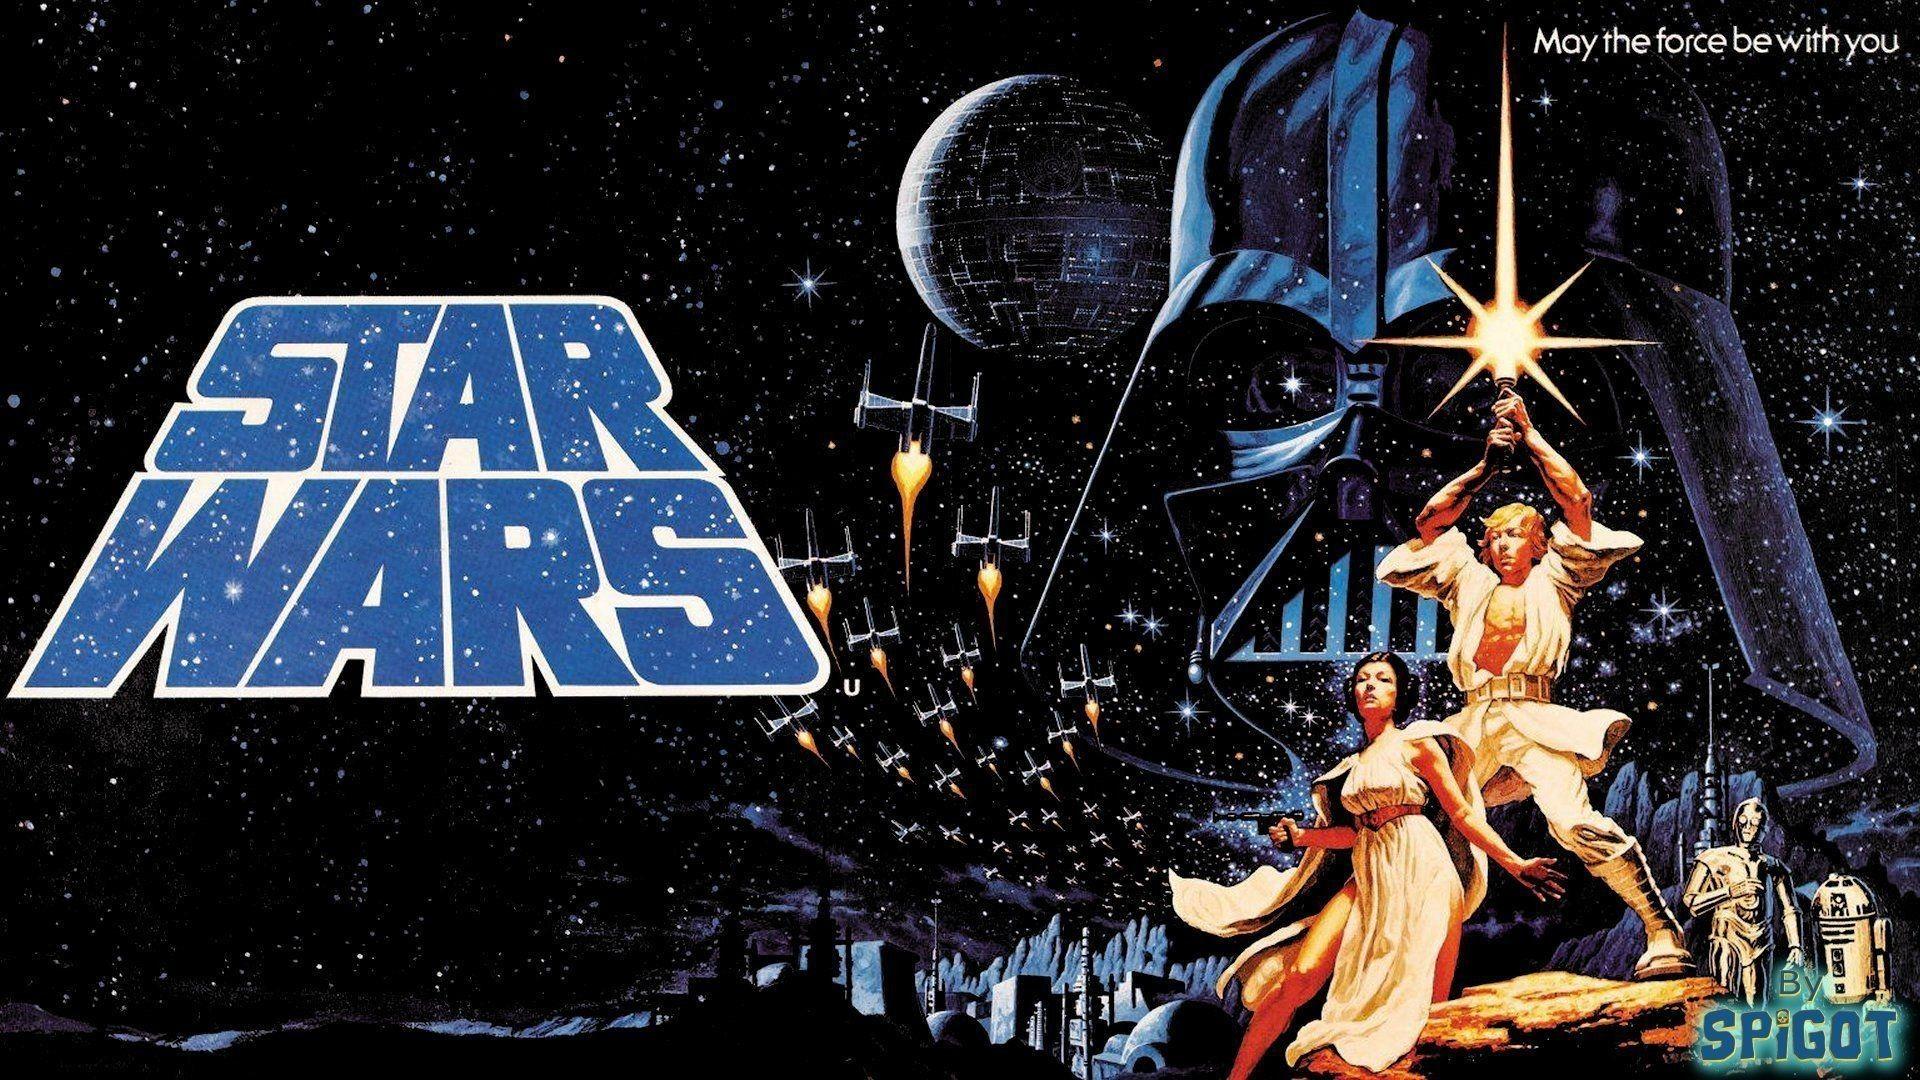 Retro Star Wars Wallpapers Top Free Retro Star Wars Backgrounds Wallpaperaccess